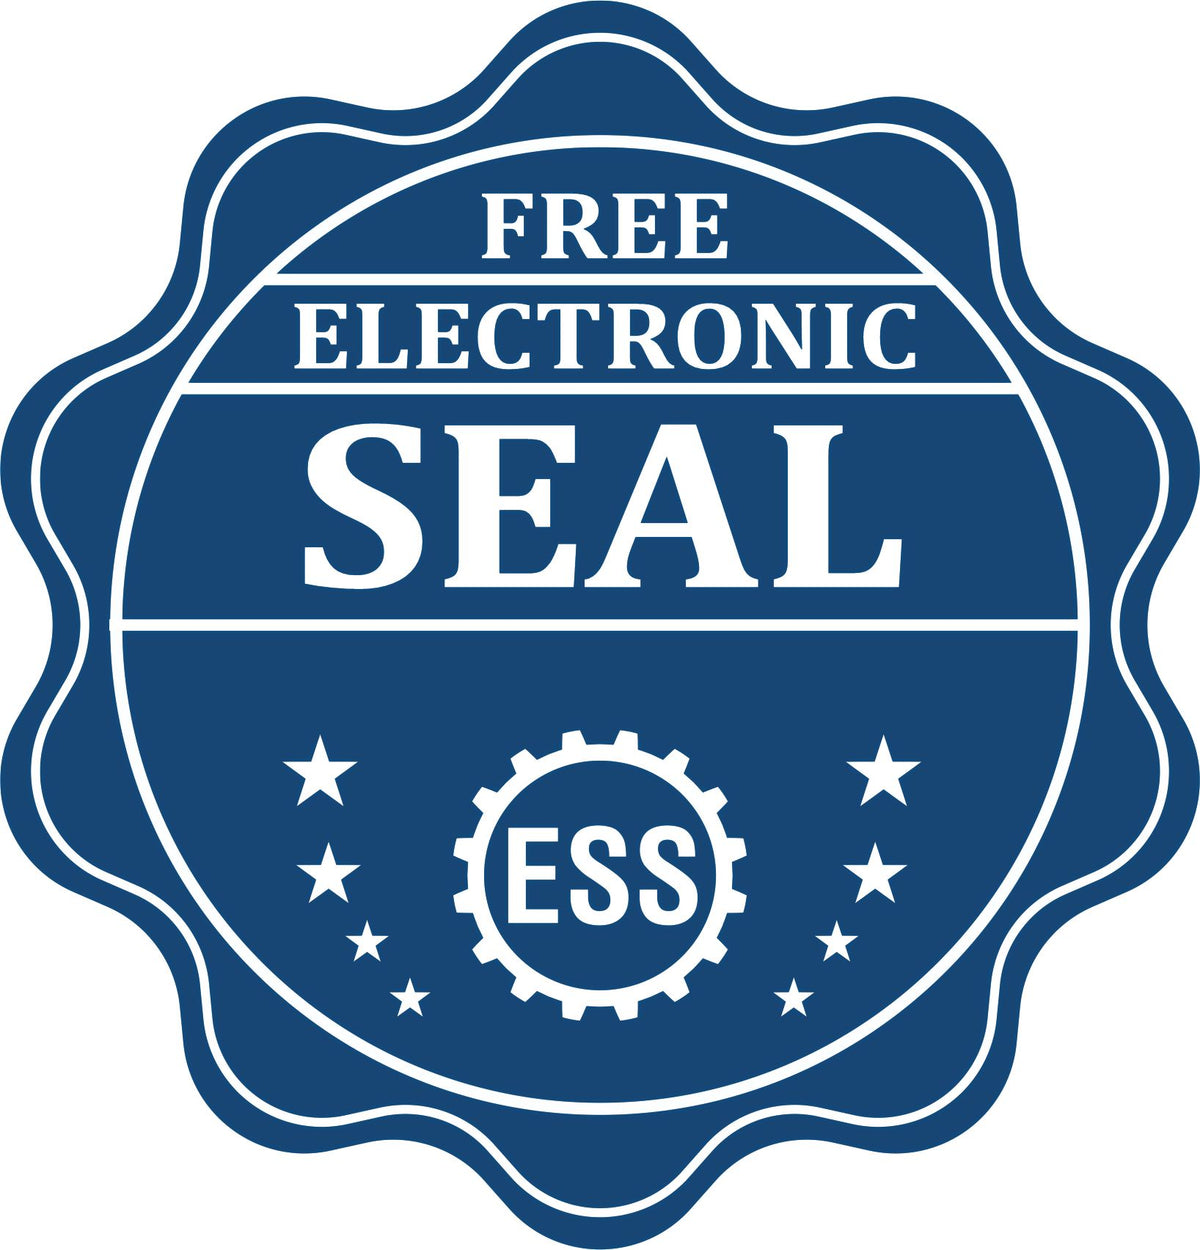 A badge showing a free electronic seal for the Nevada Engineer Desk Seal with stars and the ESS gear on the emblem.